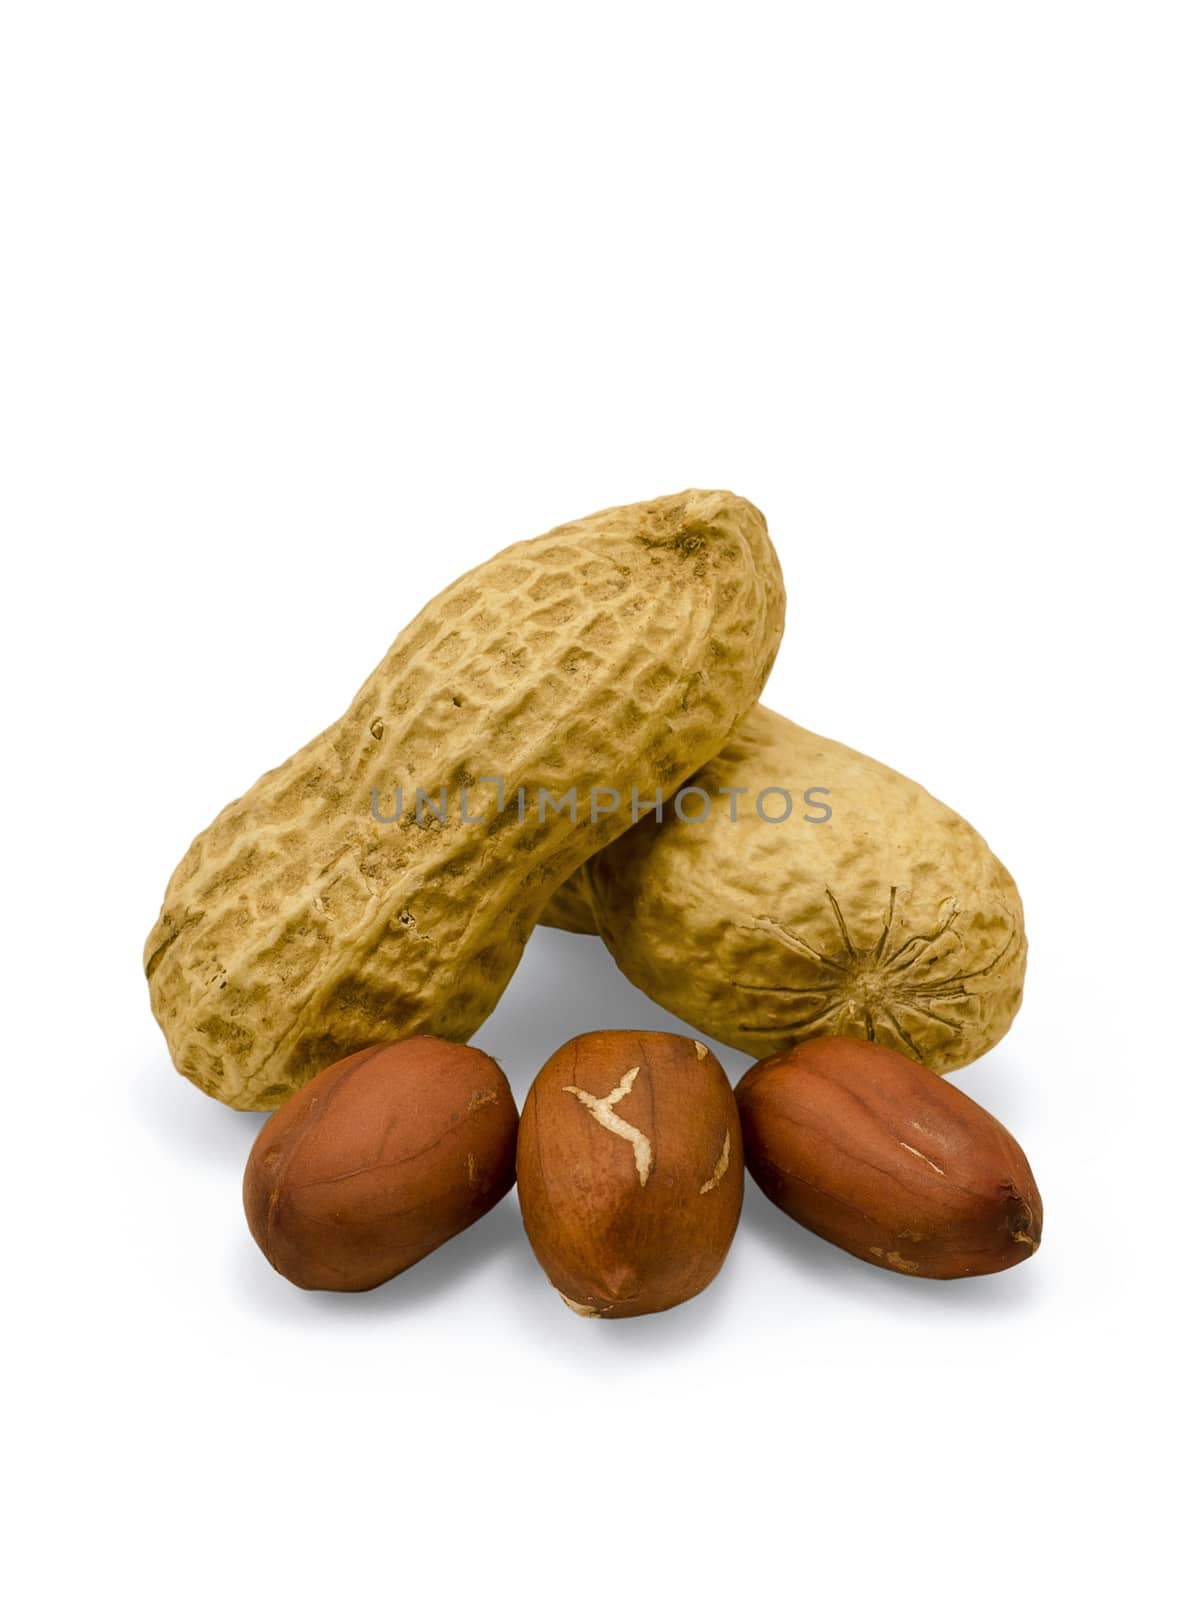 Peanuts snack on white background